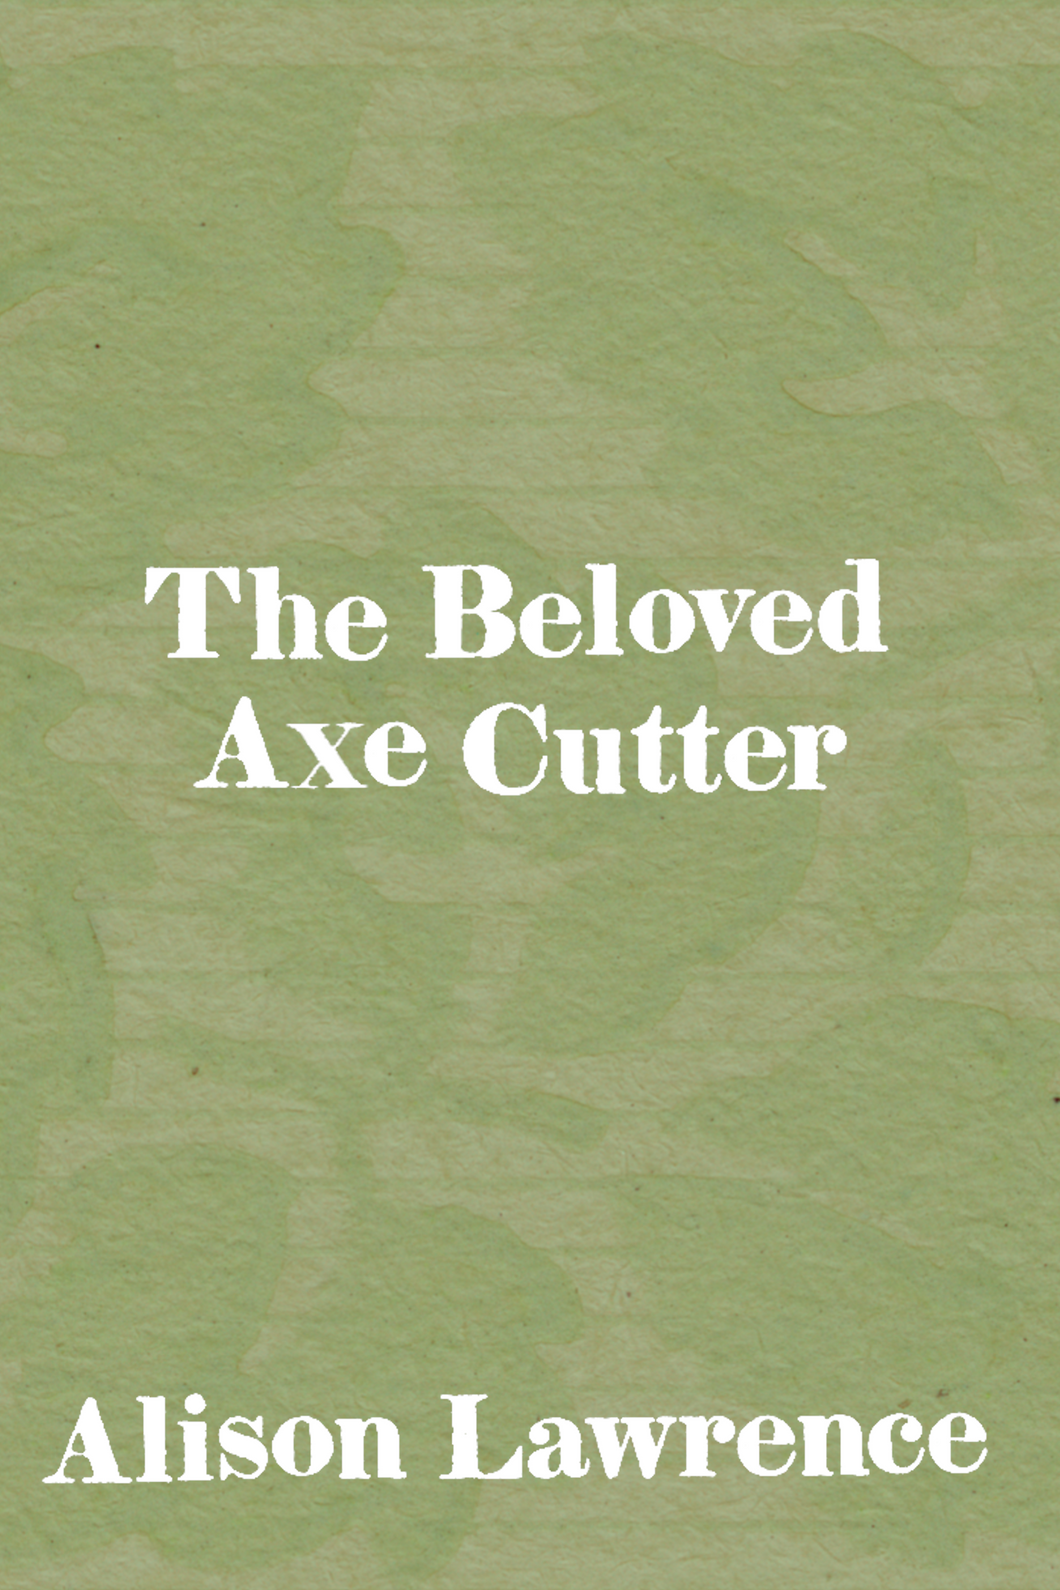 The Beloved Axe Cutter, by Alison Lawrence-Print Books-Bottlecap Press